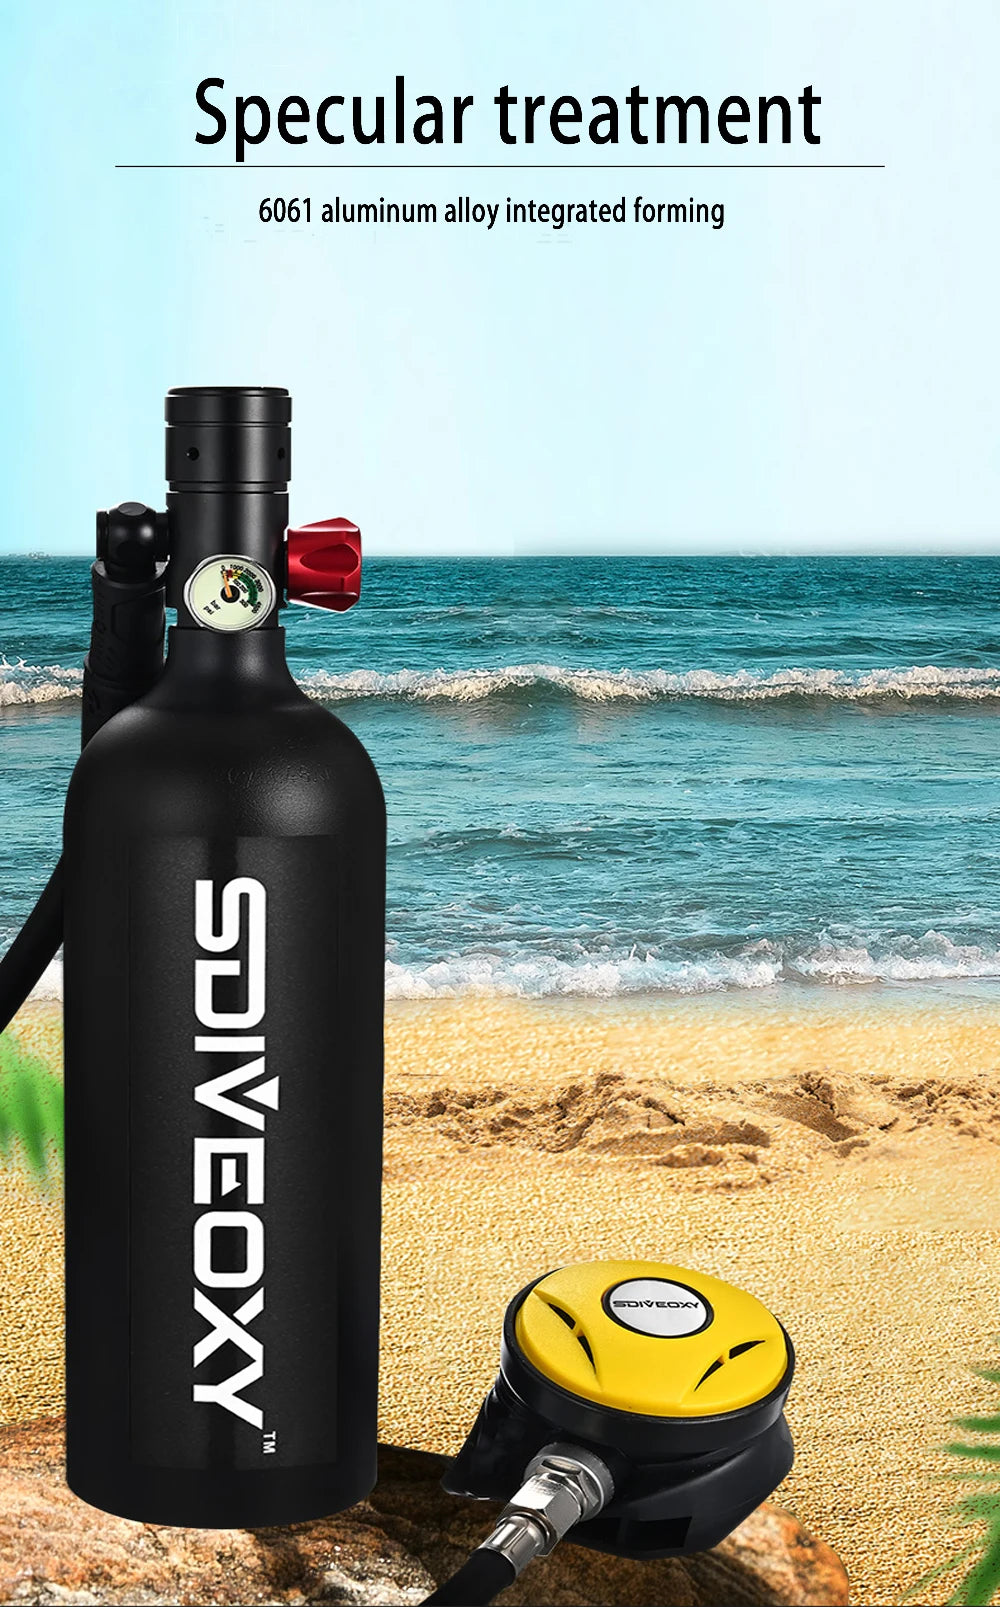 Scuba Diving Oxygen Tank 1L - Cylinder Underwater Breather for with Breathing Valve B Set - Scuba Diving Oxygen Tank 1L Price in Pakistan